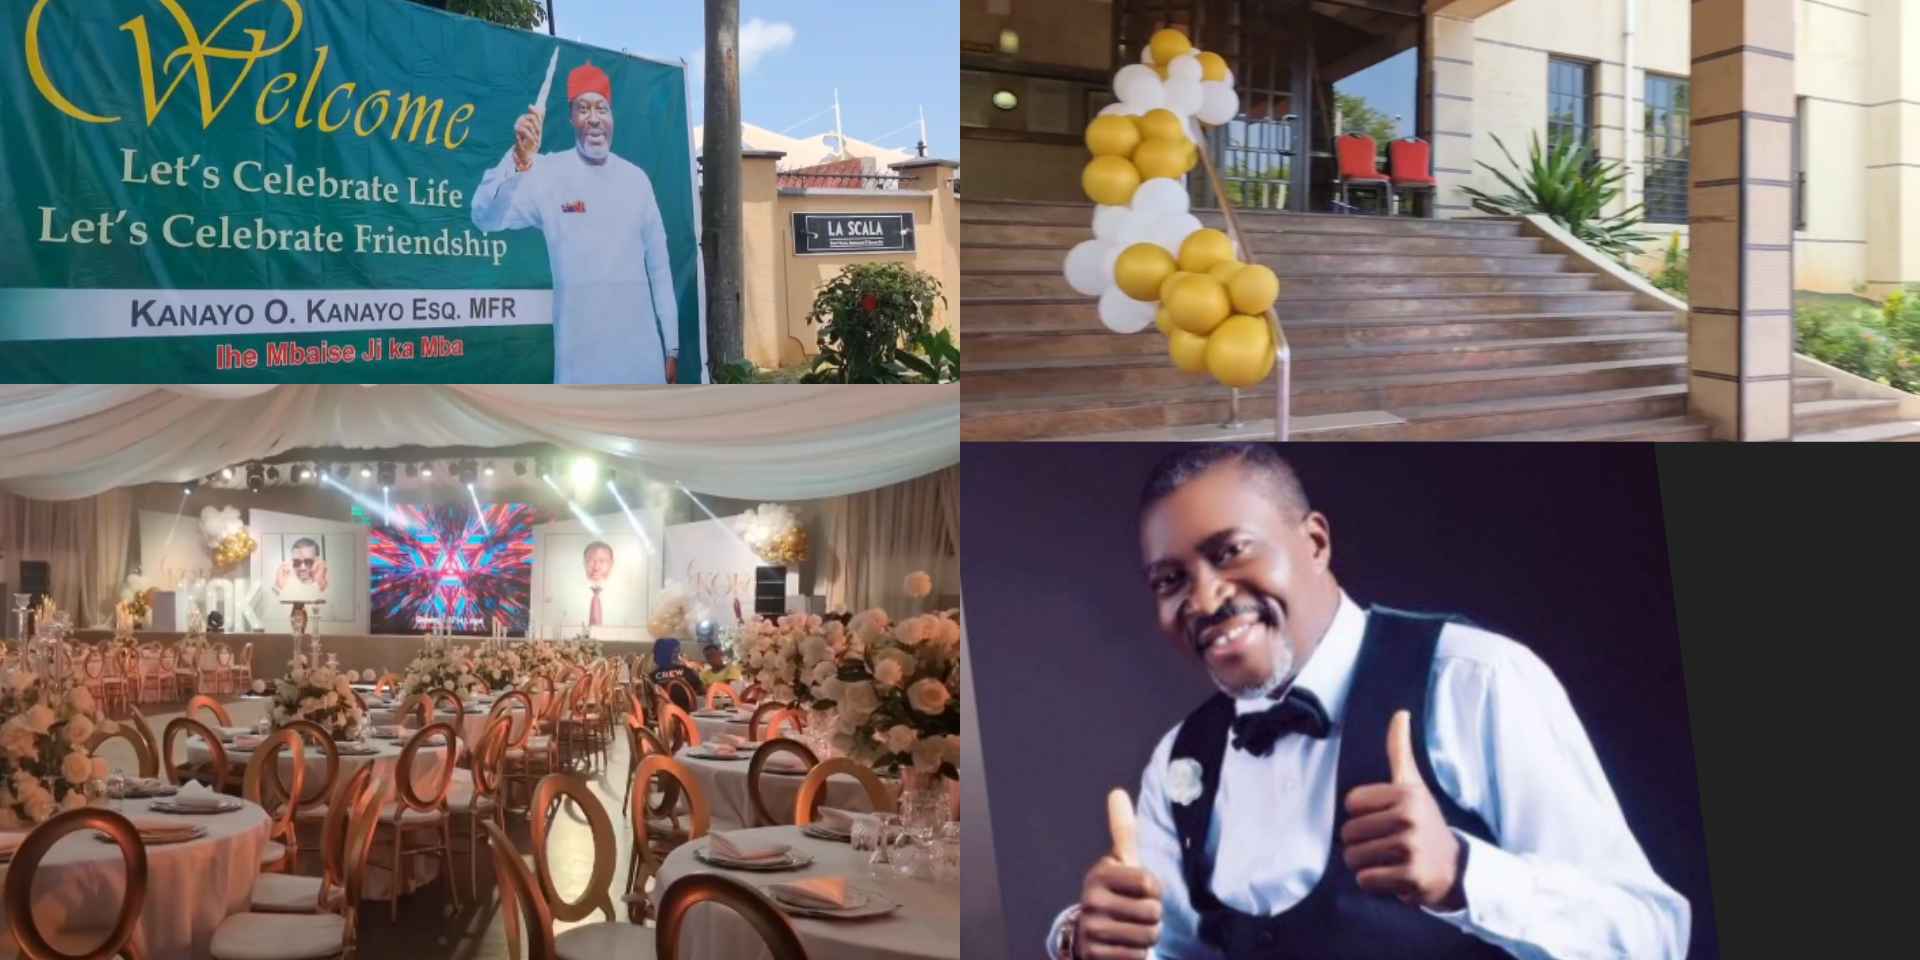 "Millions spent" - Reactions as Kanayo O. kanayo shows off preparations for his 60th birthday party; stirs anticipation [Video]